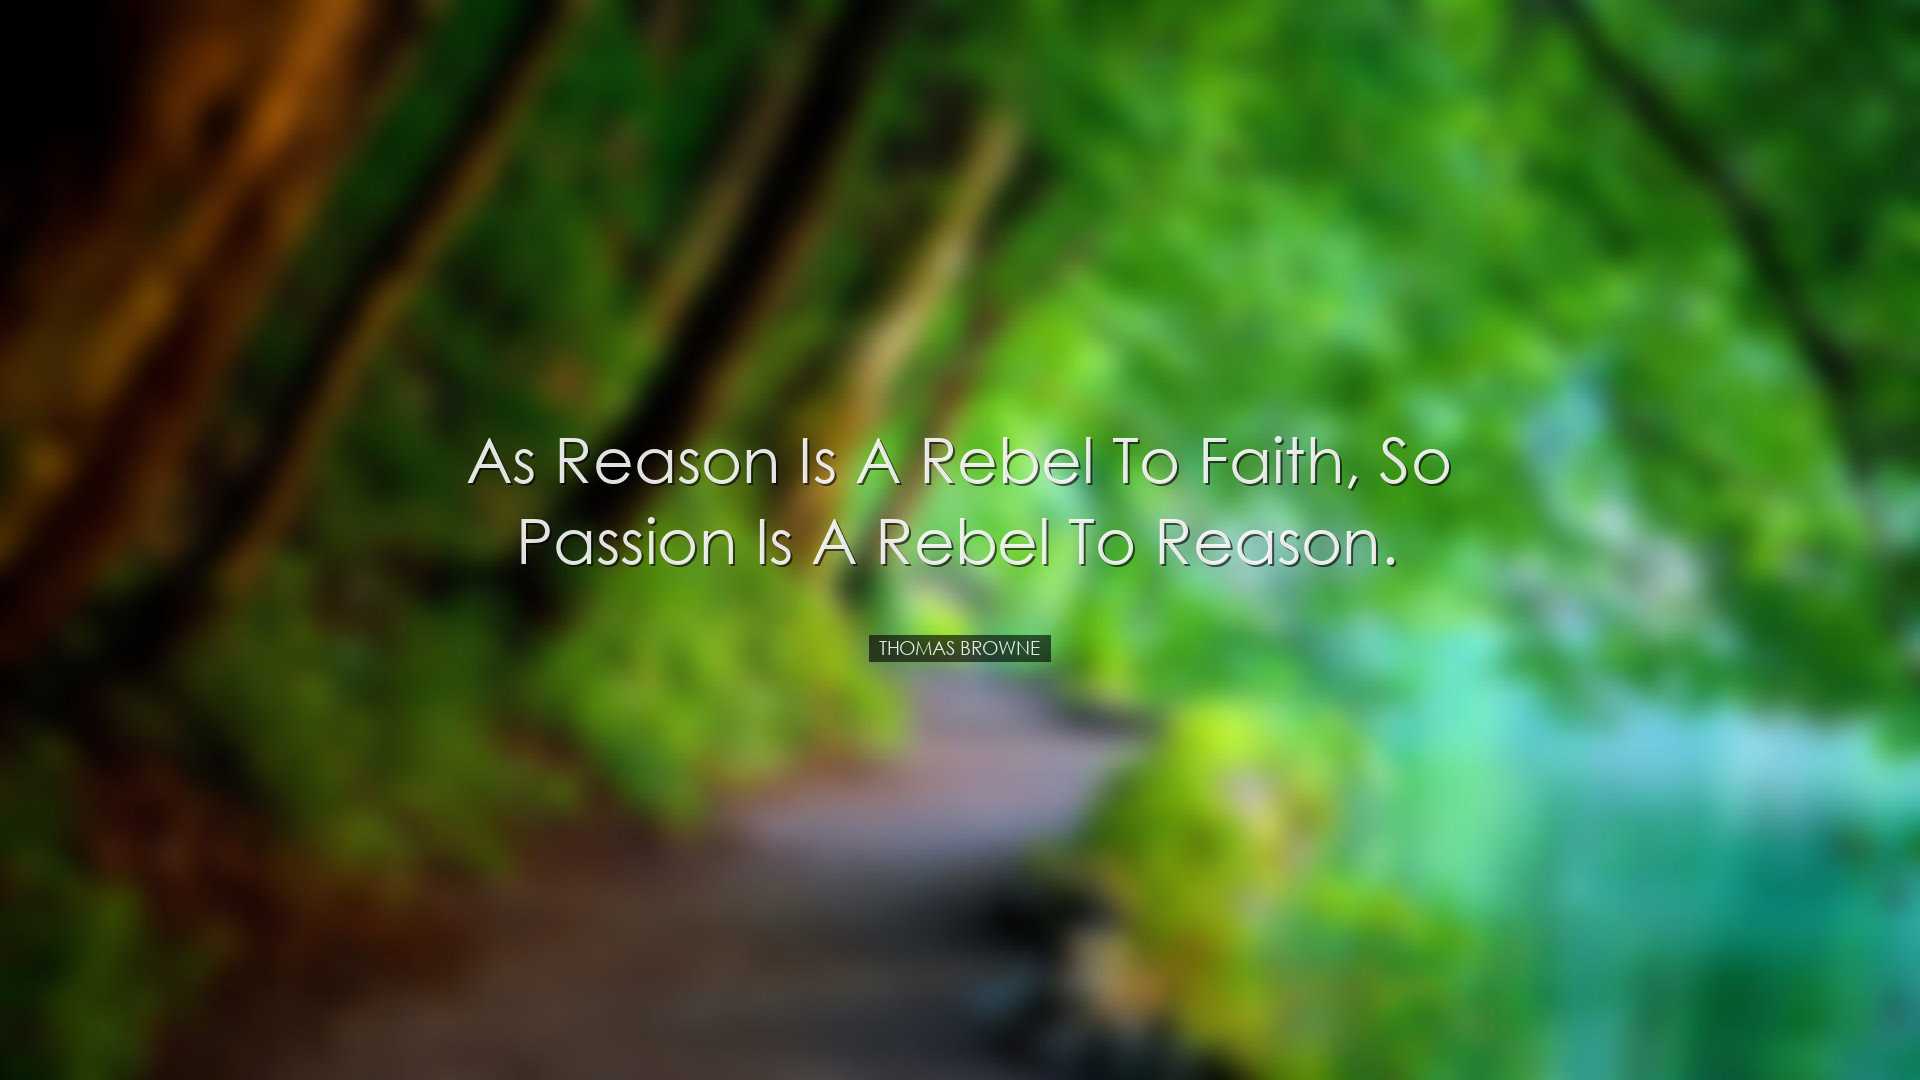 As reason is a rebel to faith, so passion is a rebel to reason. -